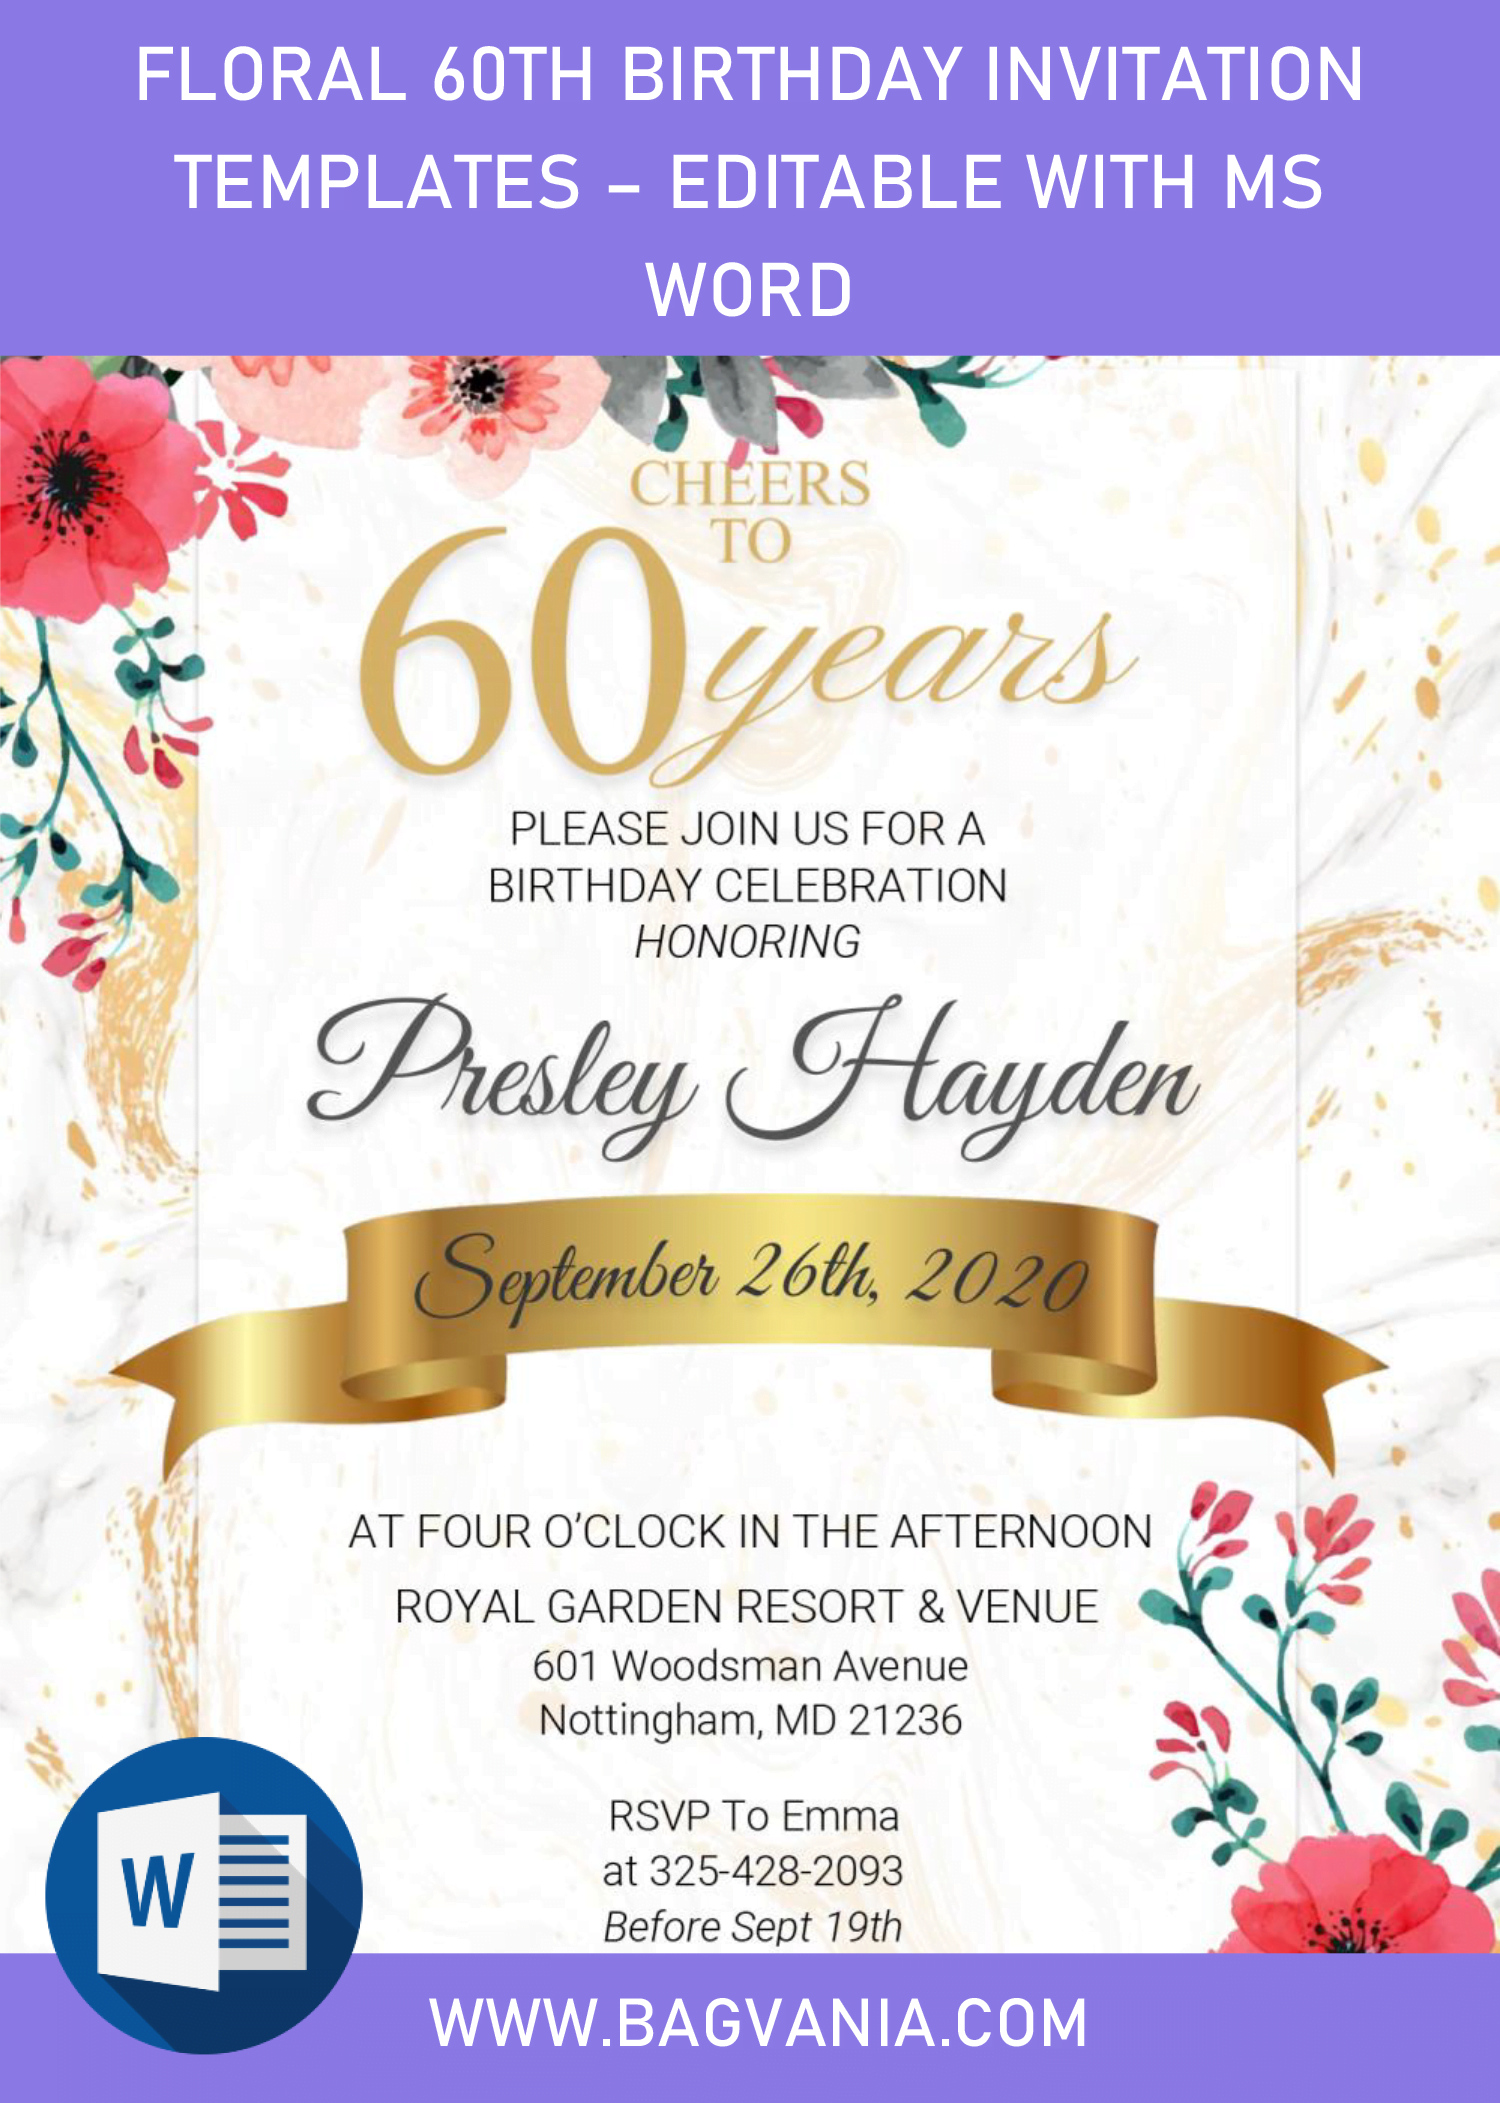 Floral 60th Birthday Invitation Templates – Editable With MS Word